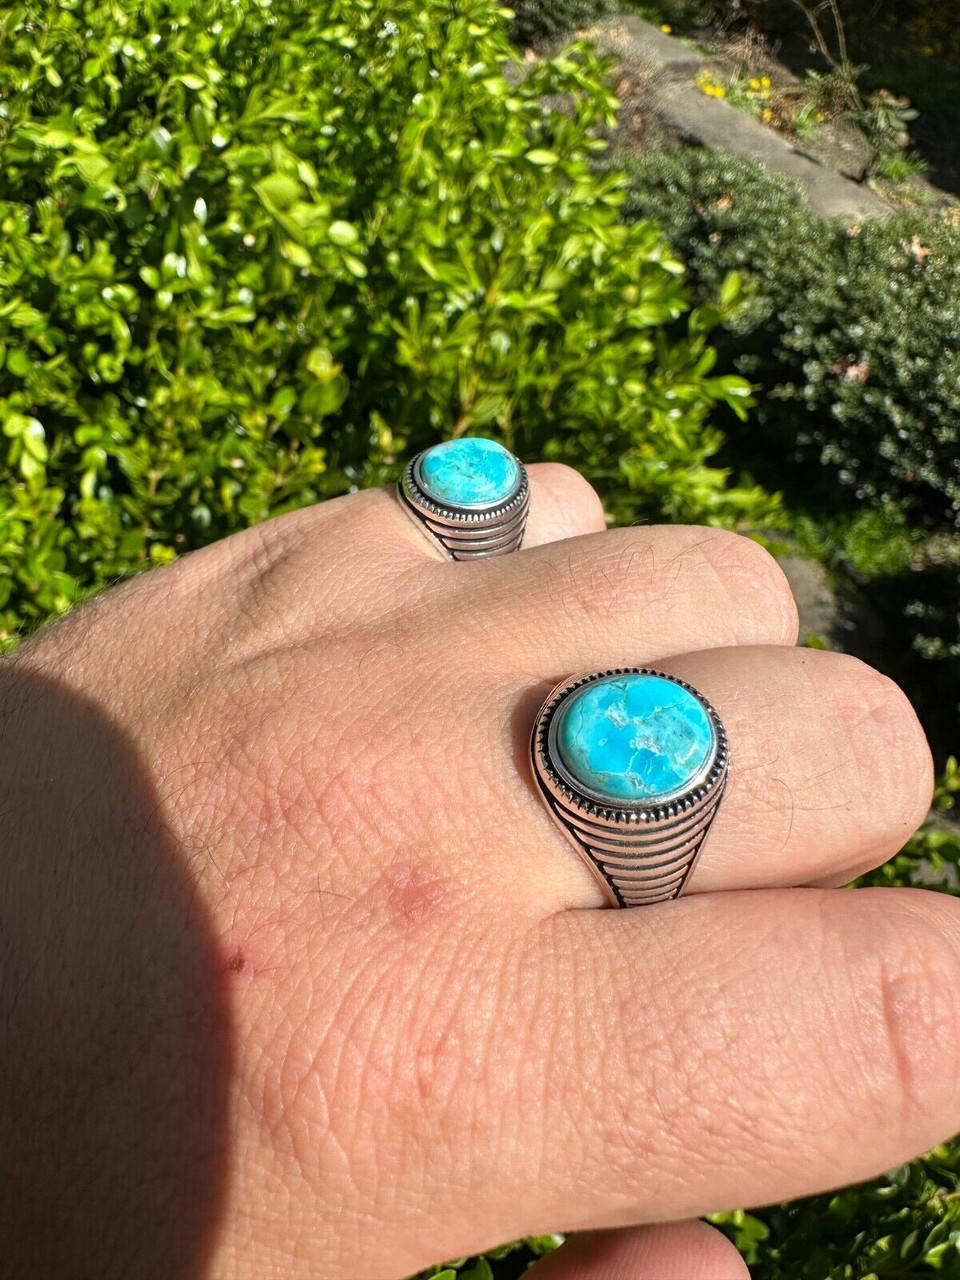 AROTOROM Turquoise Ring for Men in 925 Sterling Silver Oval Sky Blue Stone  Ring Turkish Handmade Jewelry (Size 8)|Amazon.com